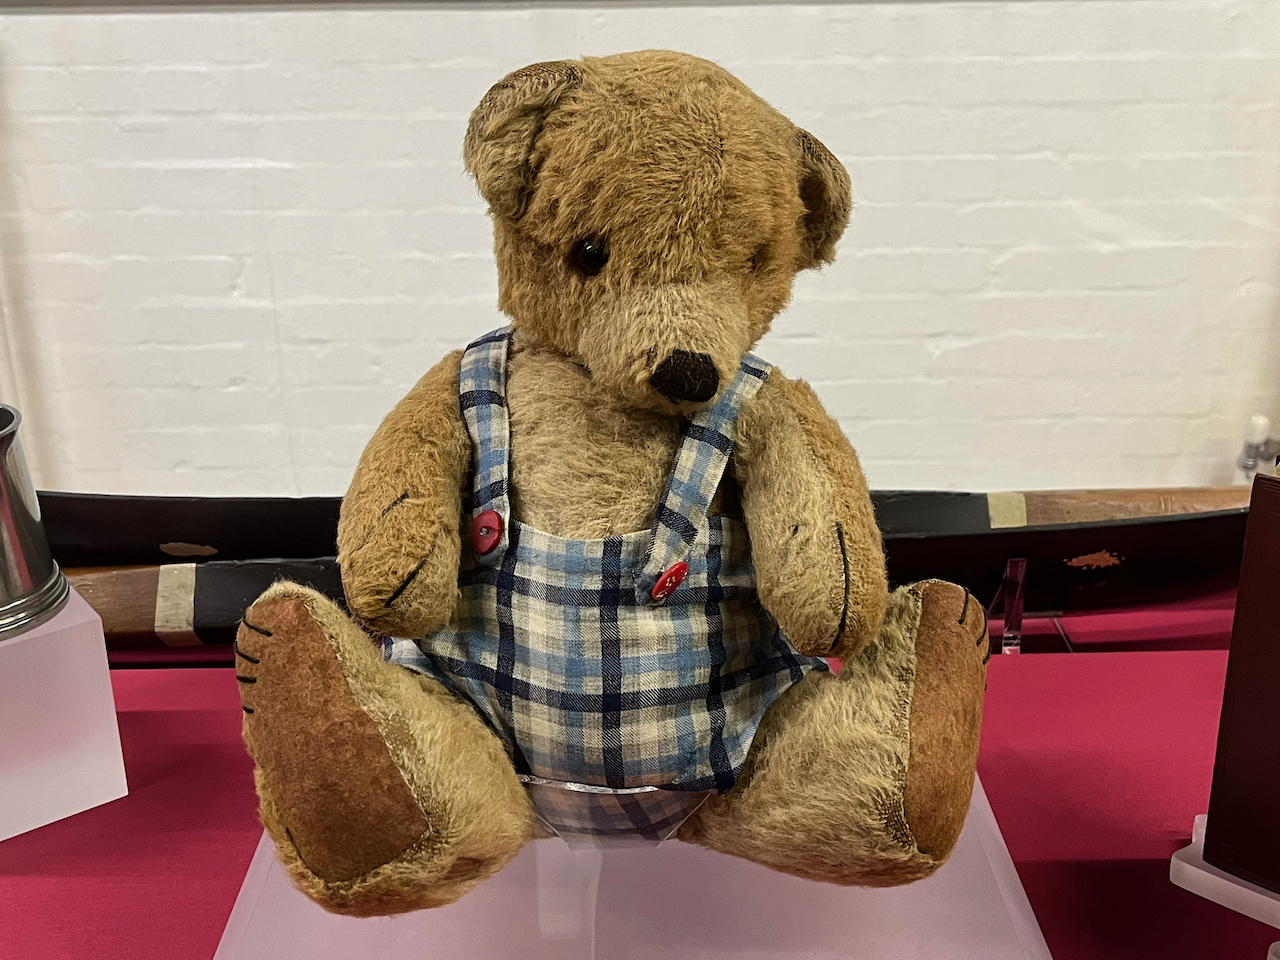 Alan Turing's teddy, a brown bear wearing a sleeveless top with a light coloured tartan style design.